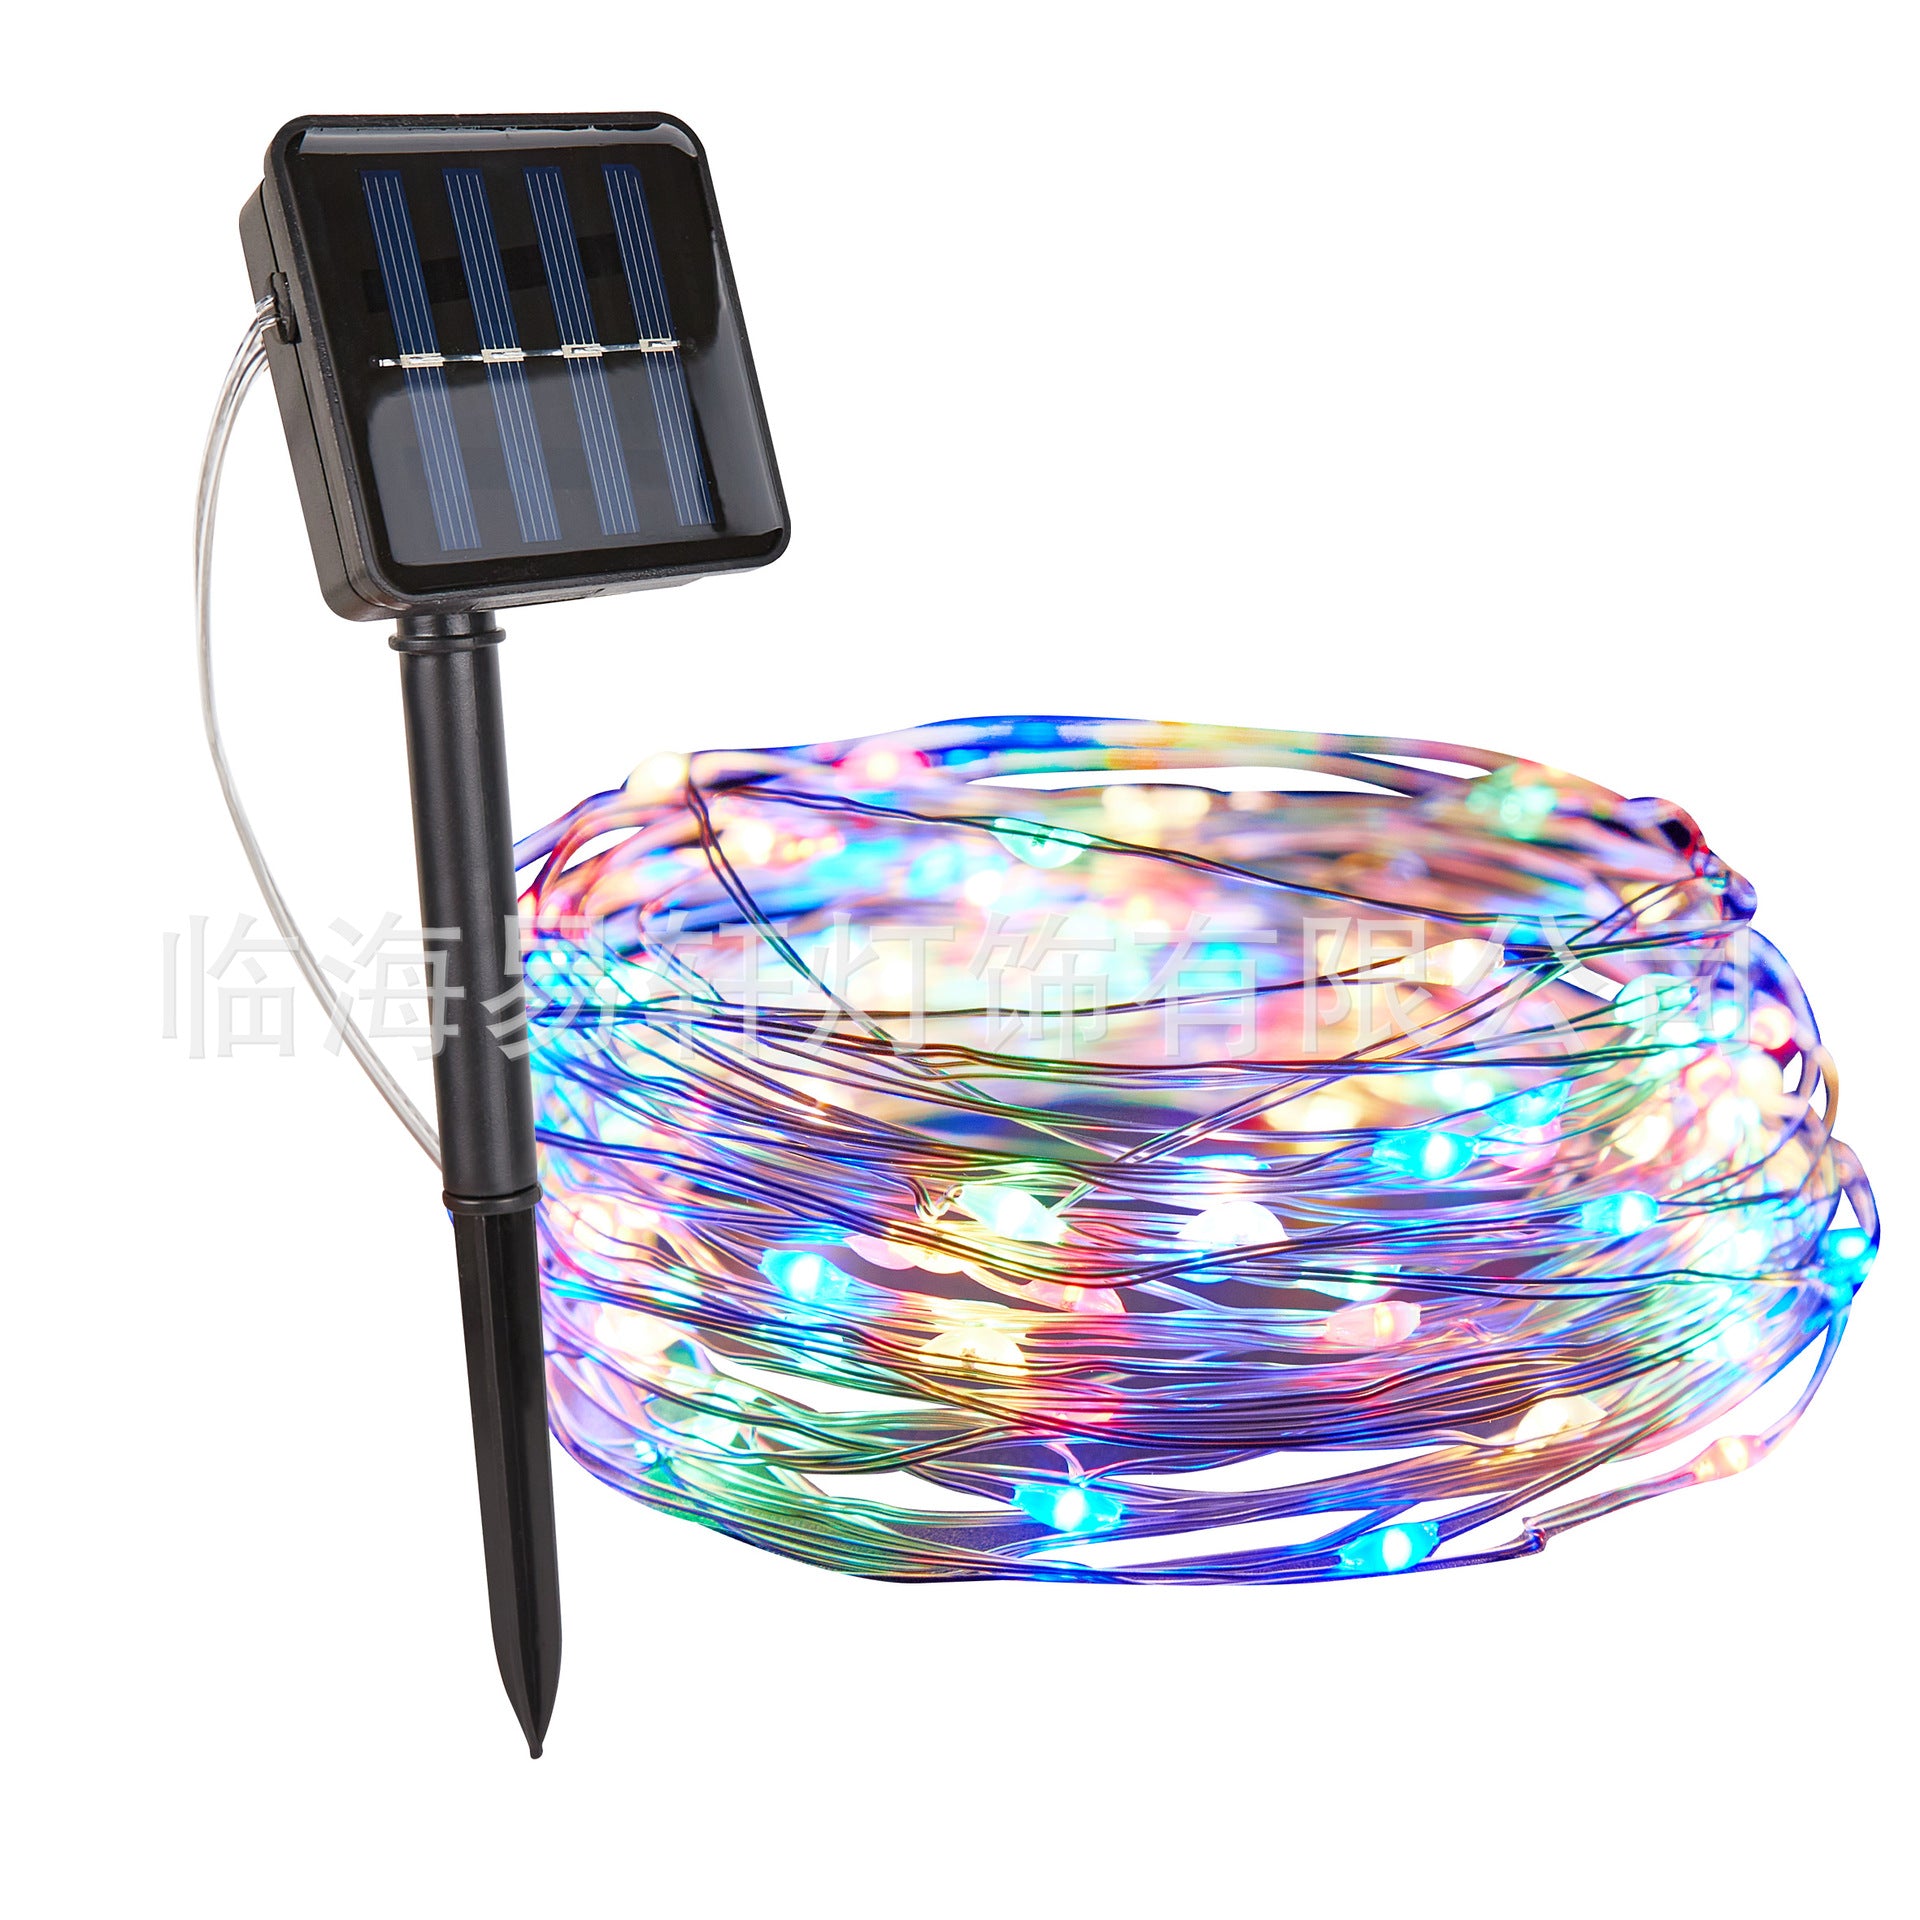 Holiday Wedding Party Garland Solar Garden Waterproof For Home Led Decor